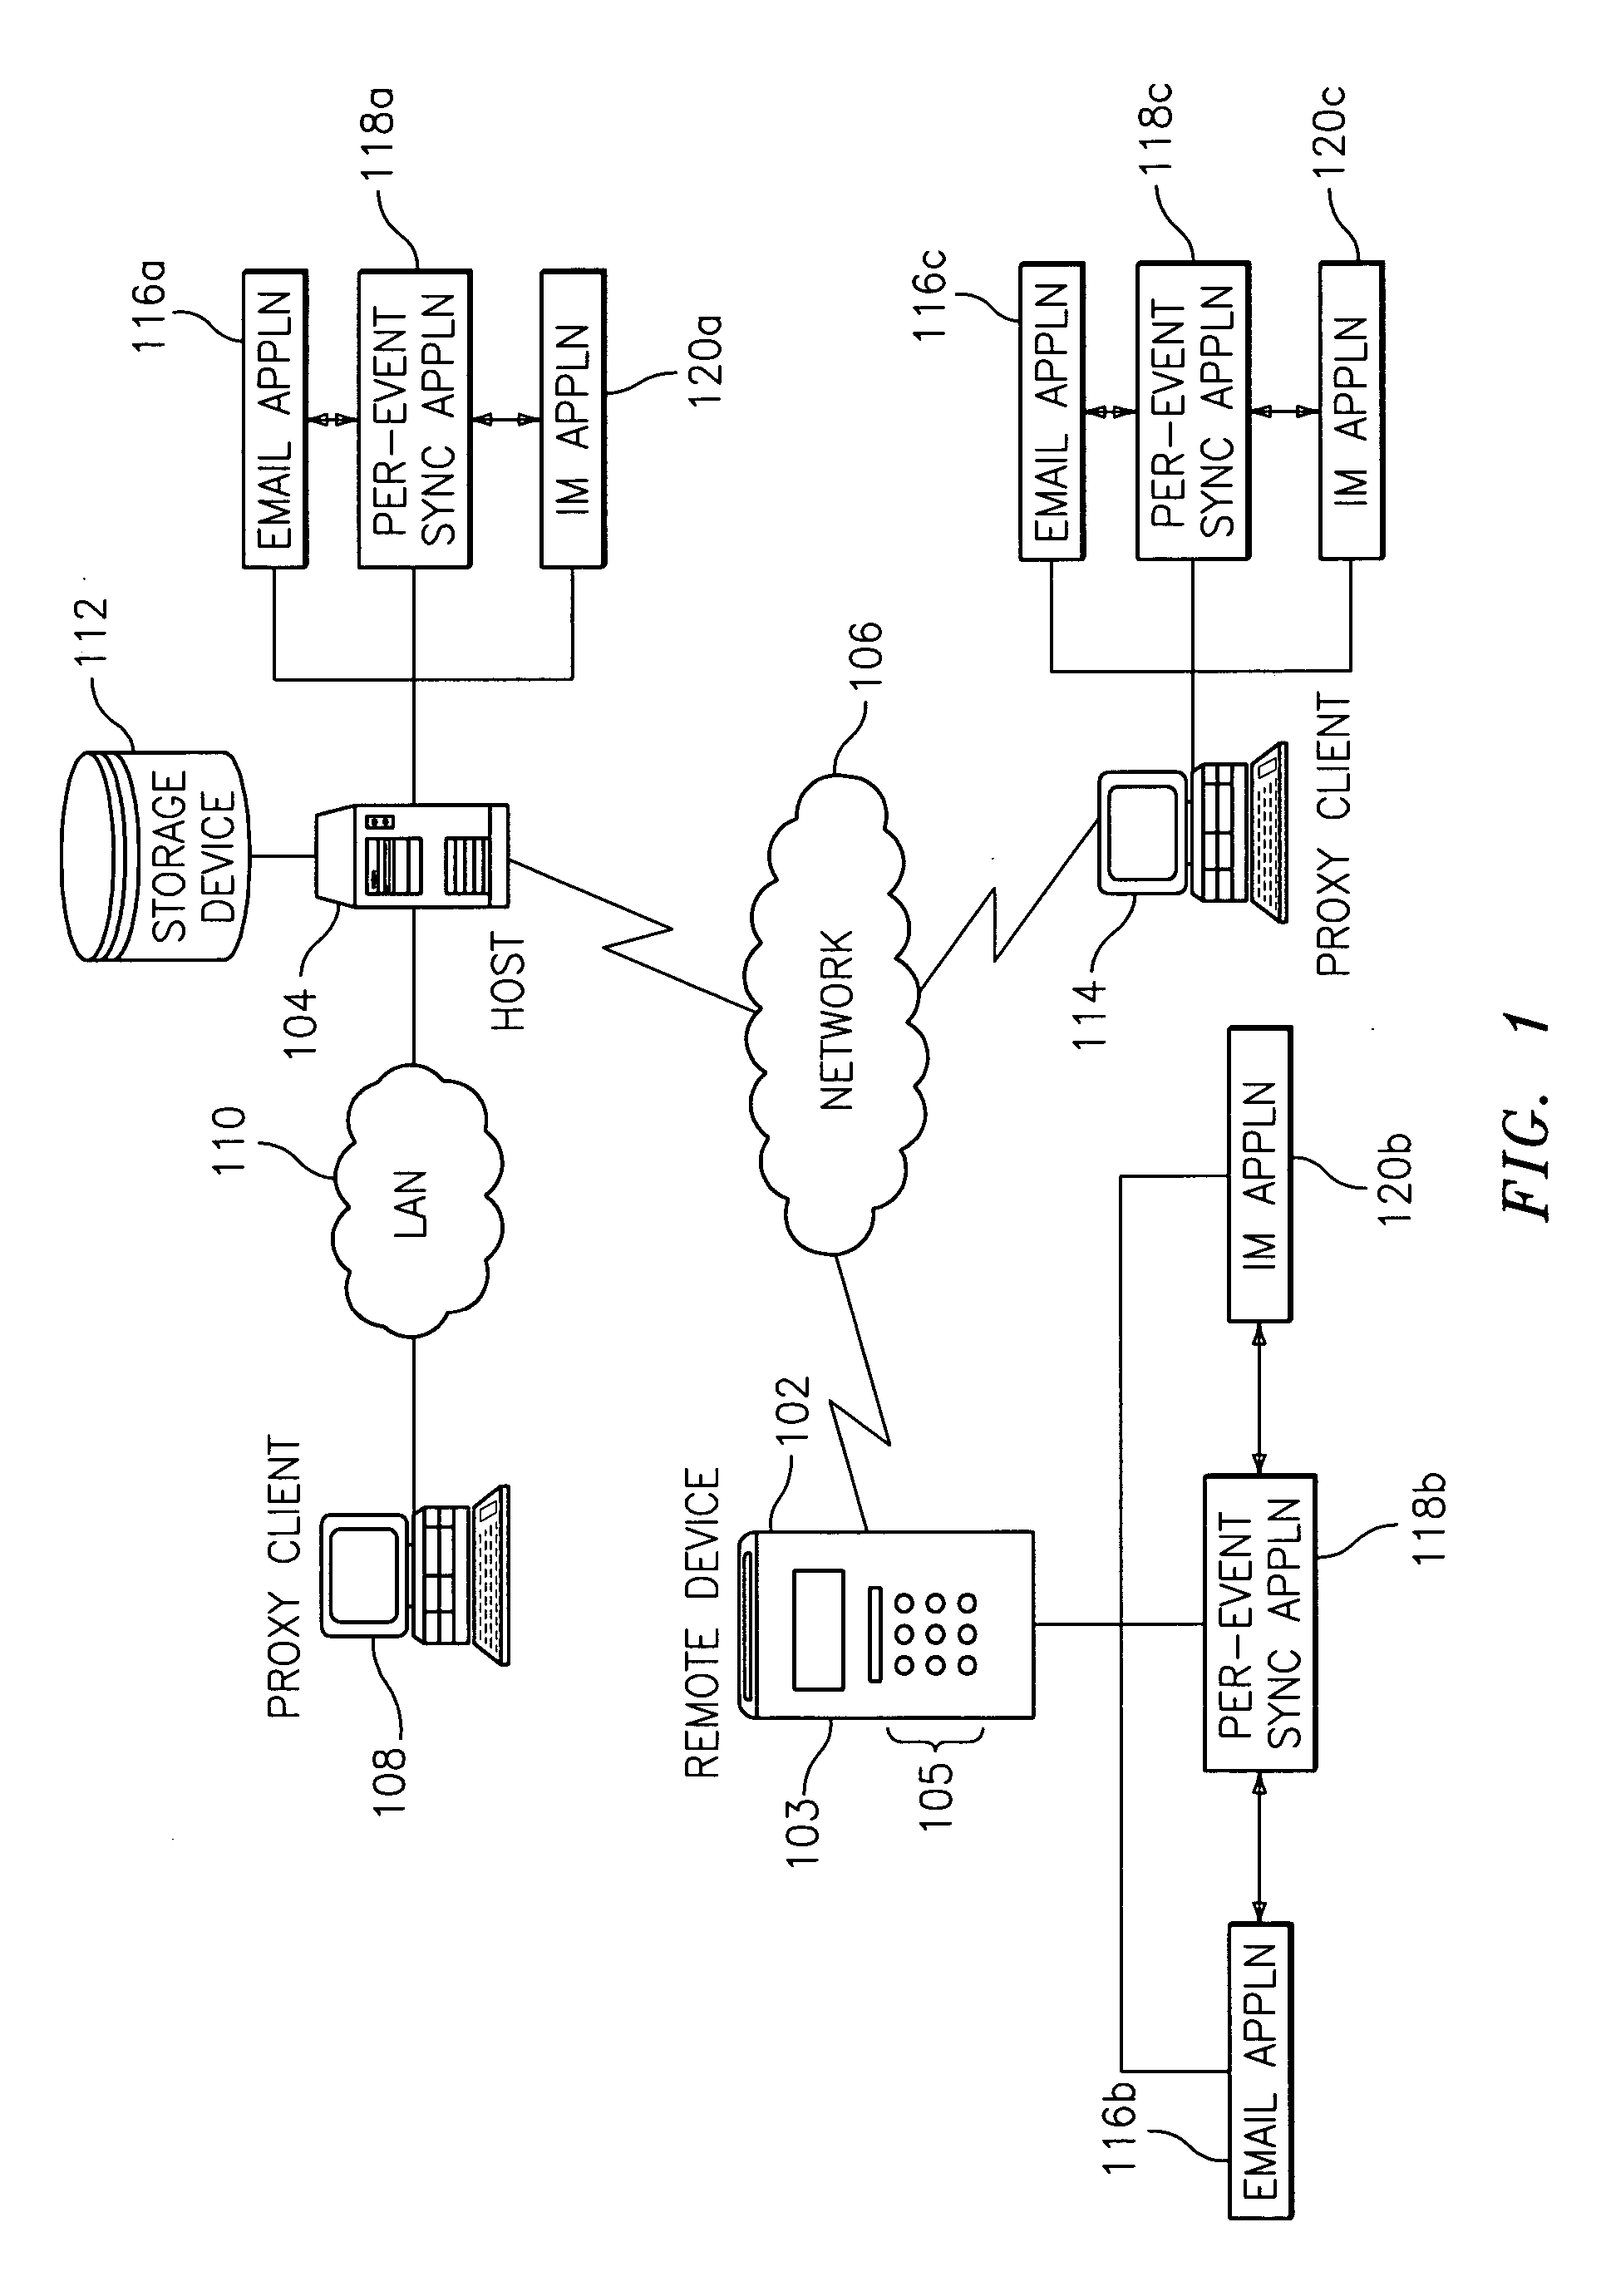 Methods, systems, and computer program products for performing per-event device synchronization